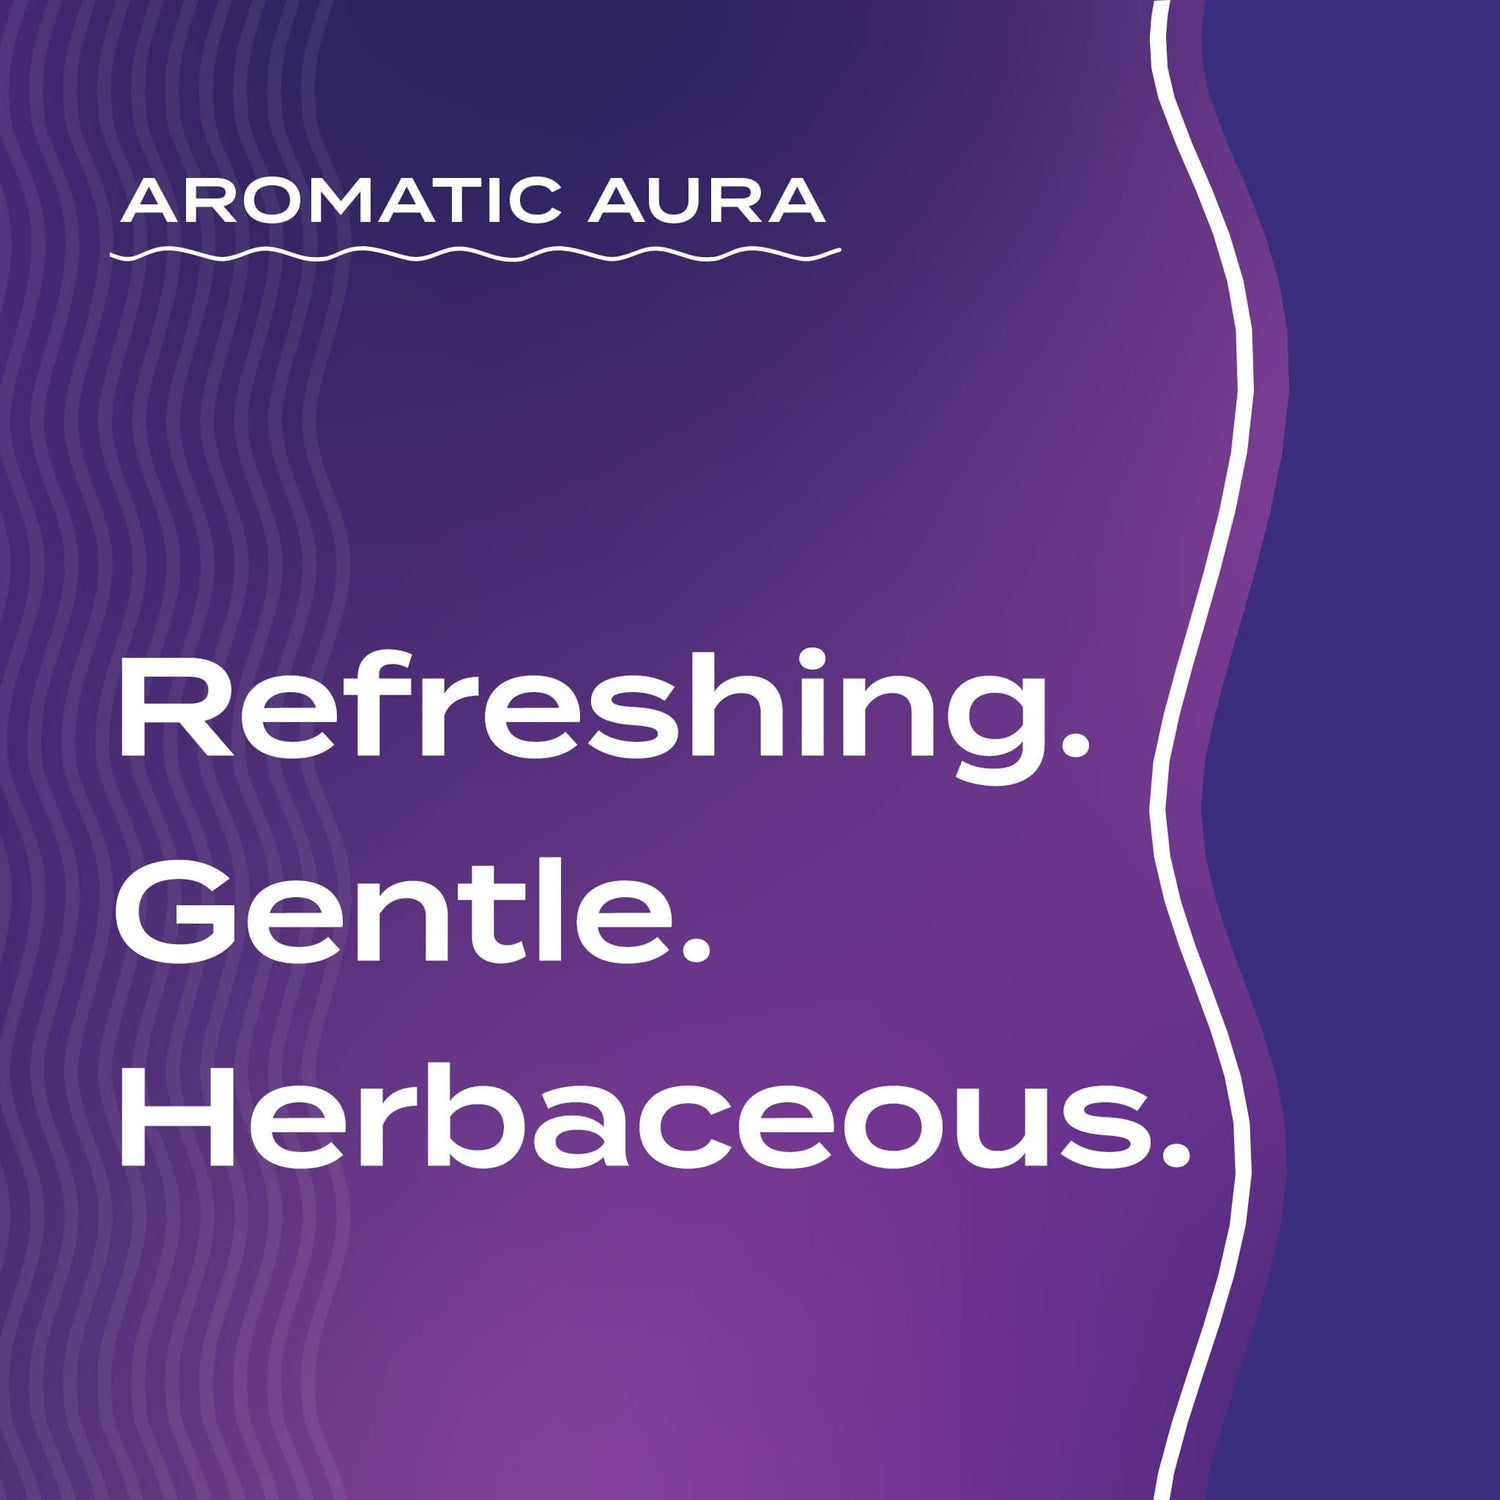 Text graphic depicting the aromatic aroma of Lavender-Rosemary: Refreshing, Gentle, Herbaceous.